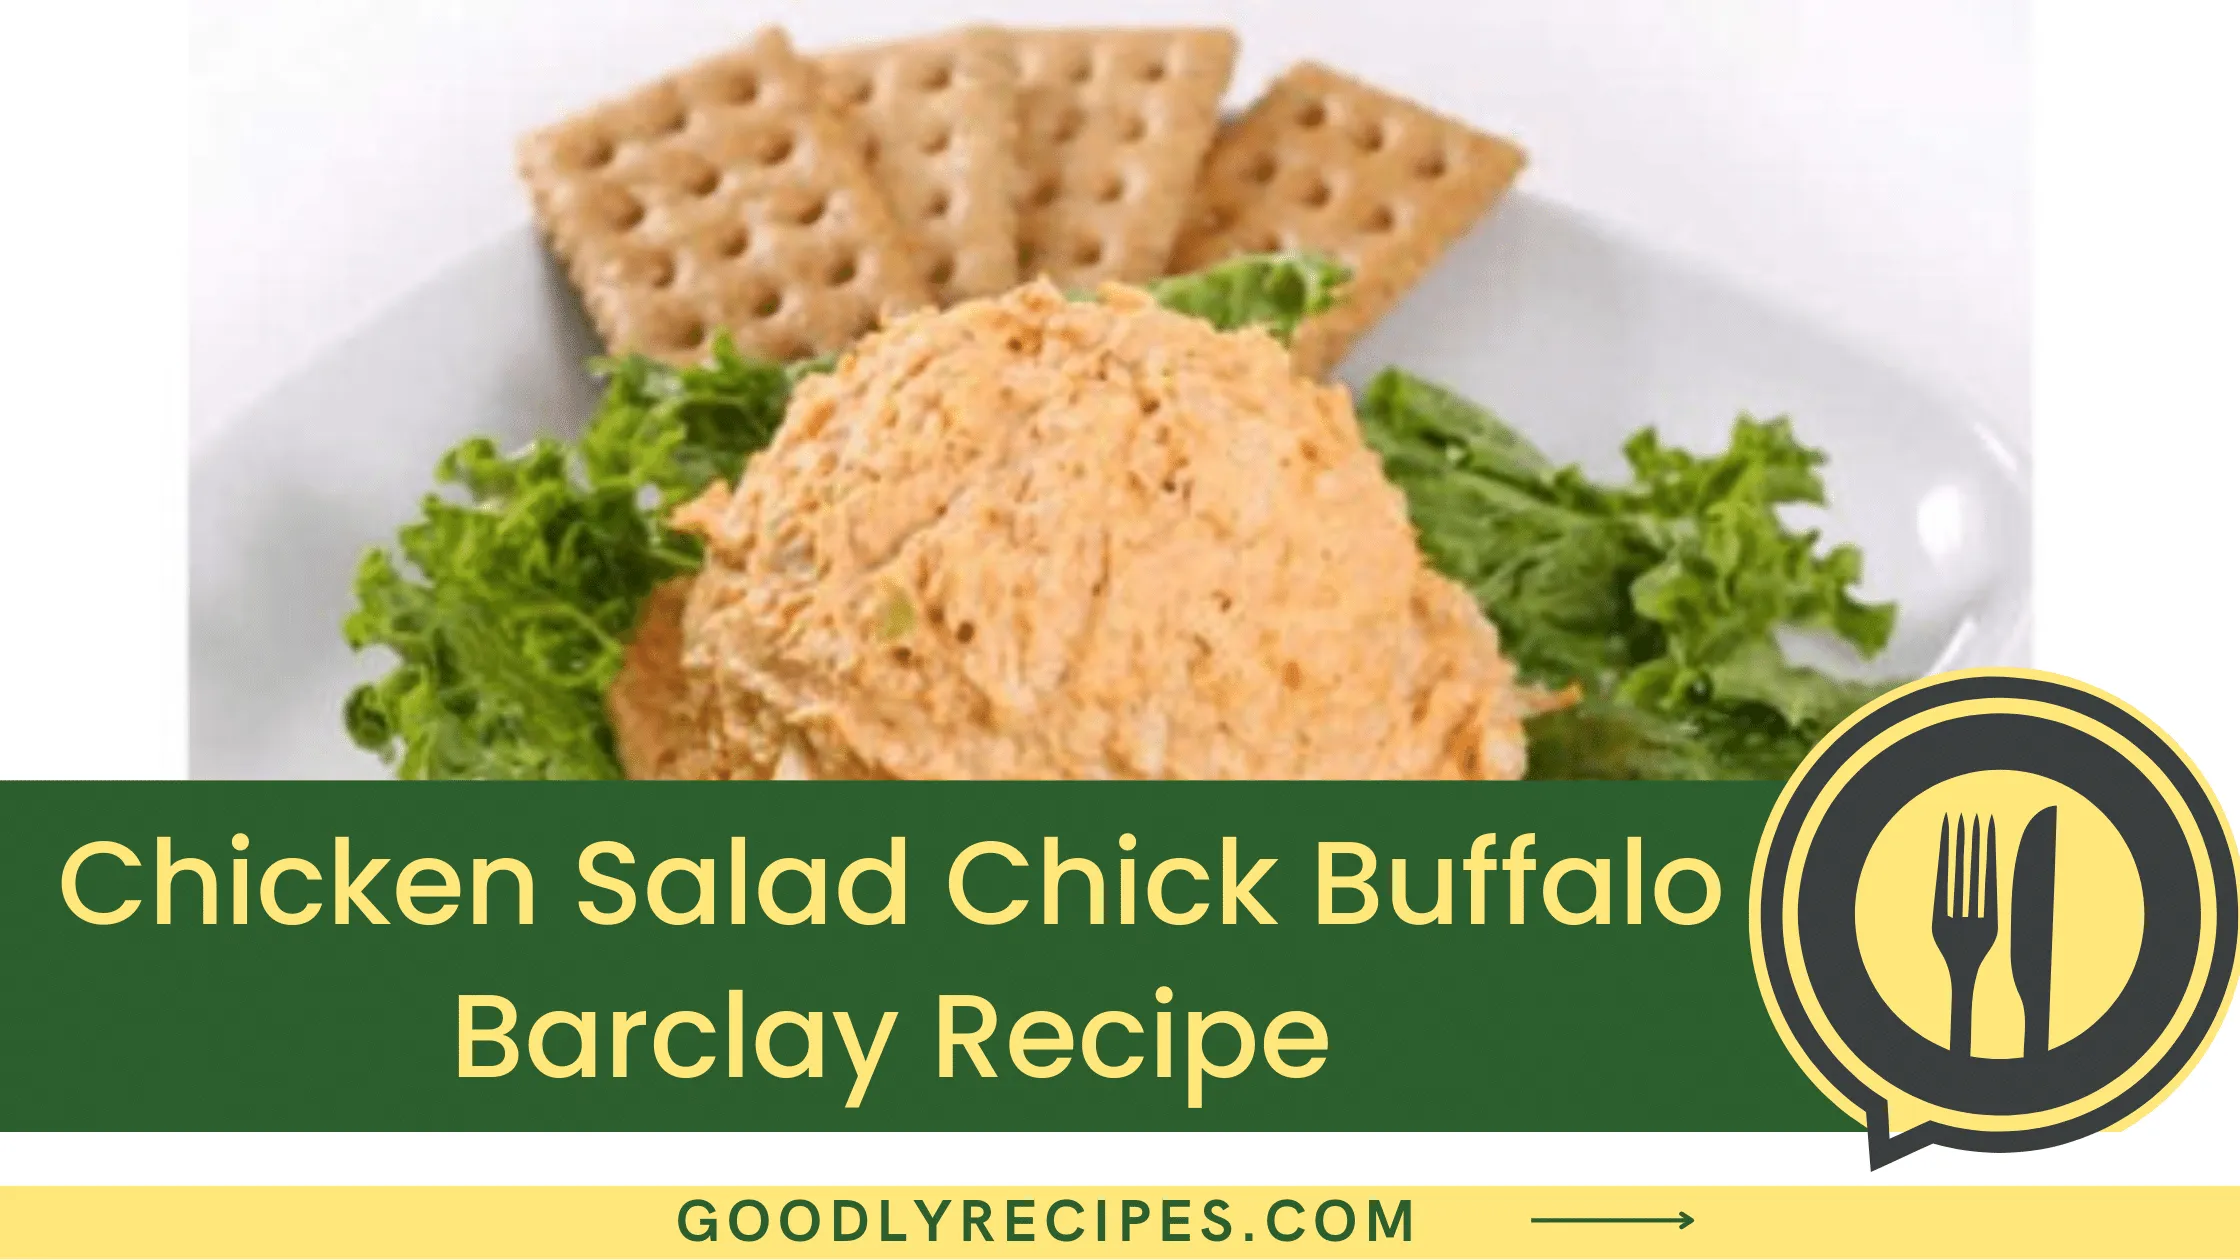 What is Chicken Salad Chick Buffalo Barclay Recipe?